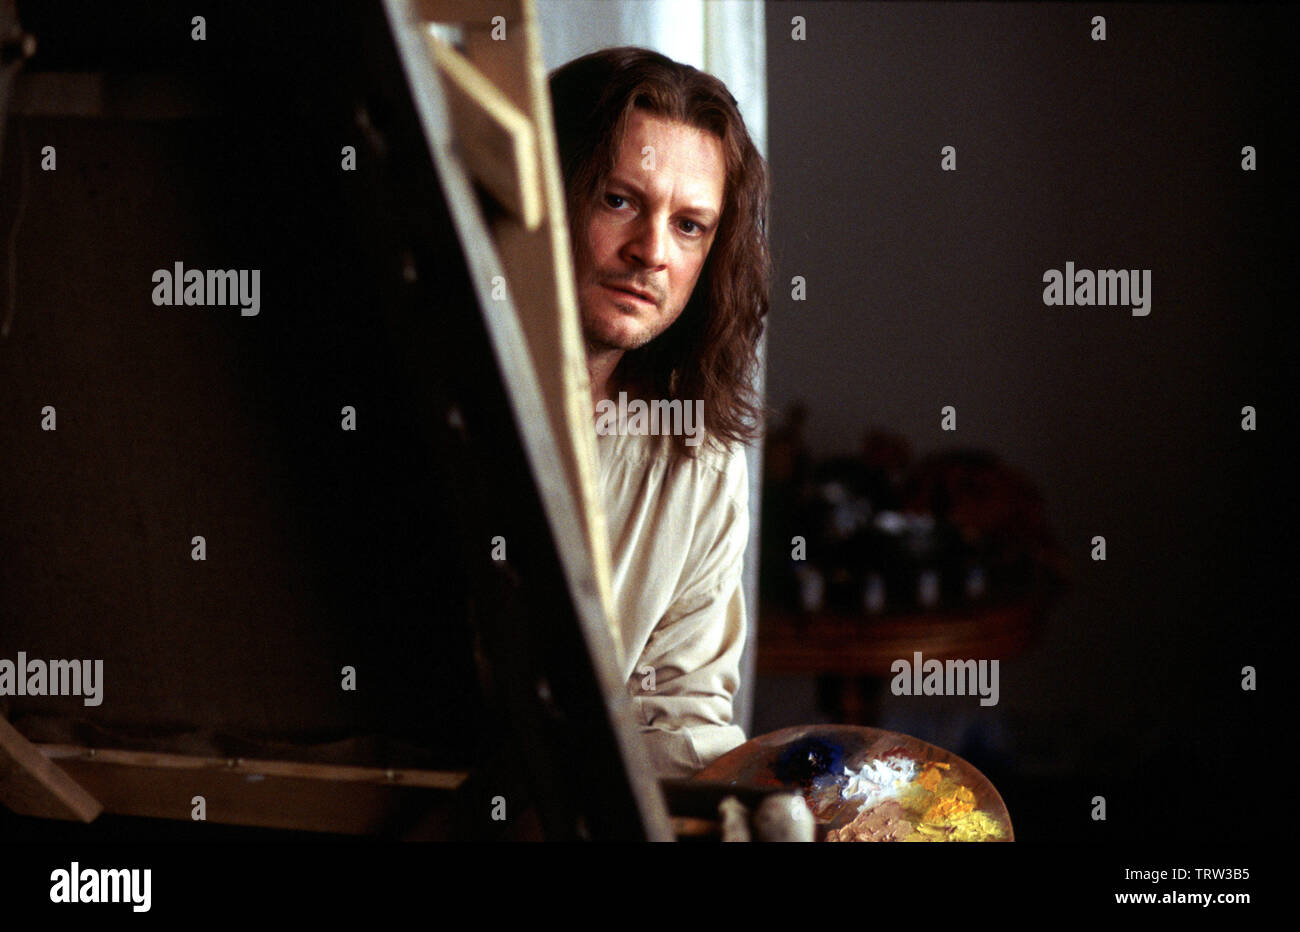 COLIN FIRTH in GIRL WITH A PEARL EARRING (2003). Copyright: Editorial use only. No merchandising or book covers. This is a publicly distributed handout. Access rights only, no license of copyright provided. Only to be reproduced in conjunction with promotion of this film. Credit: LIONS GATE FILMS / Album Stock Photo